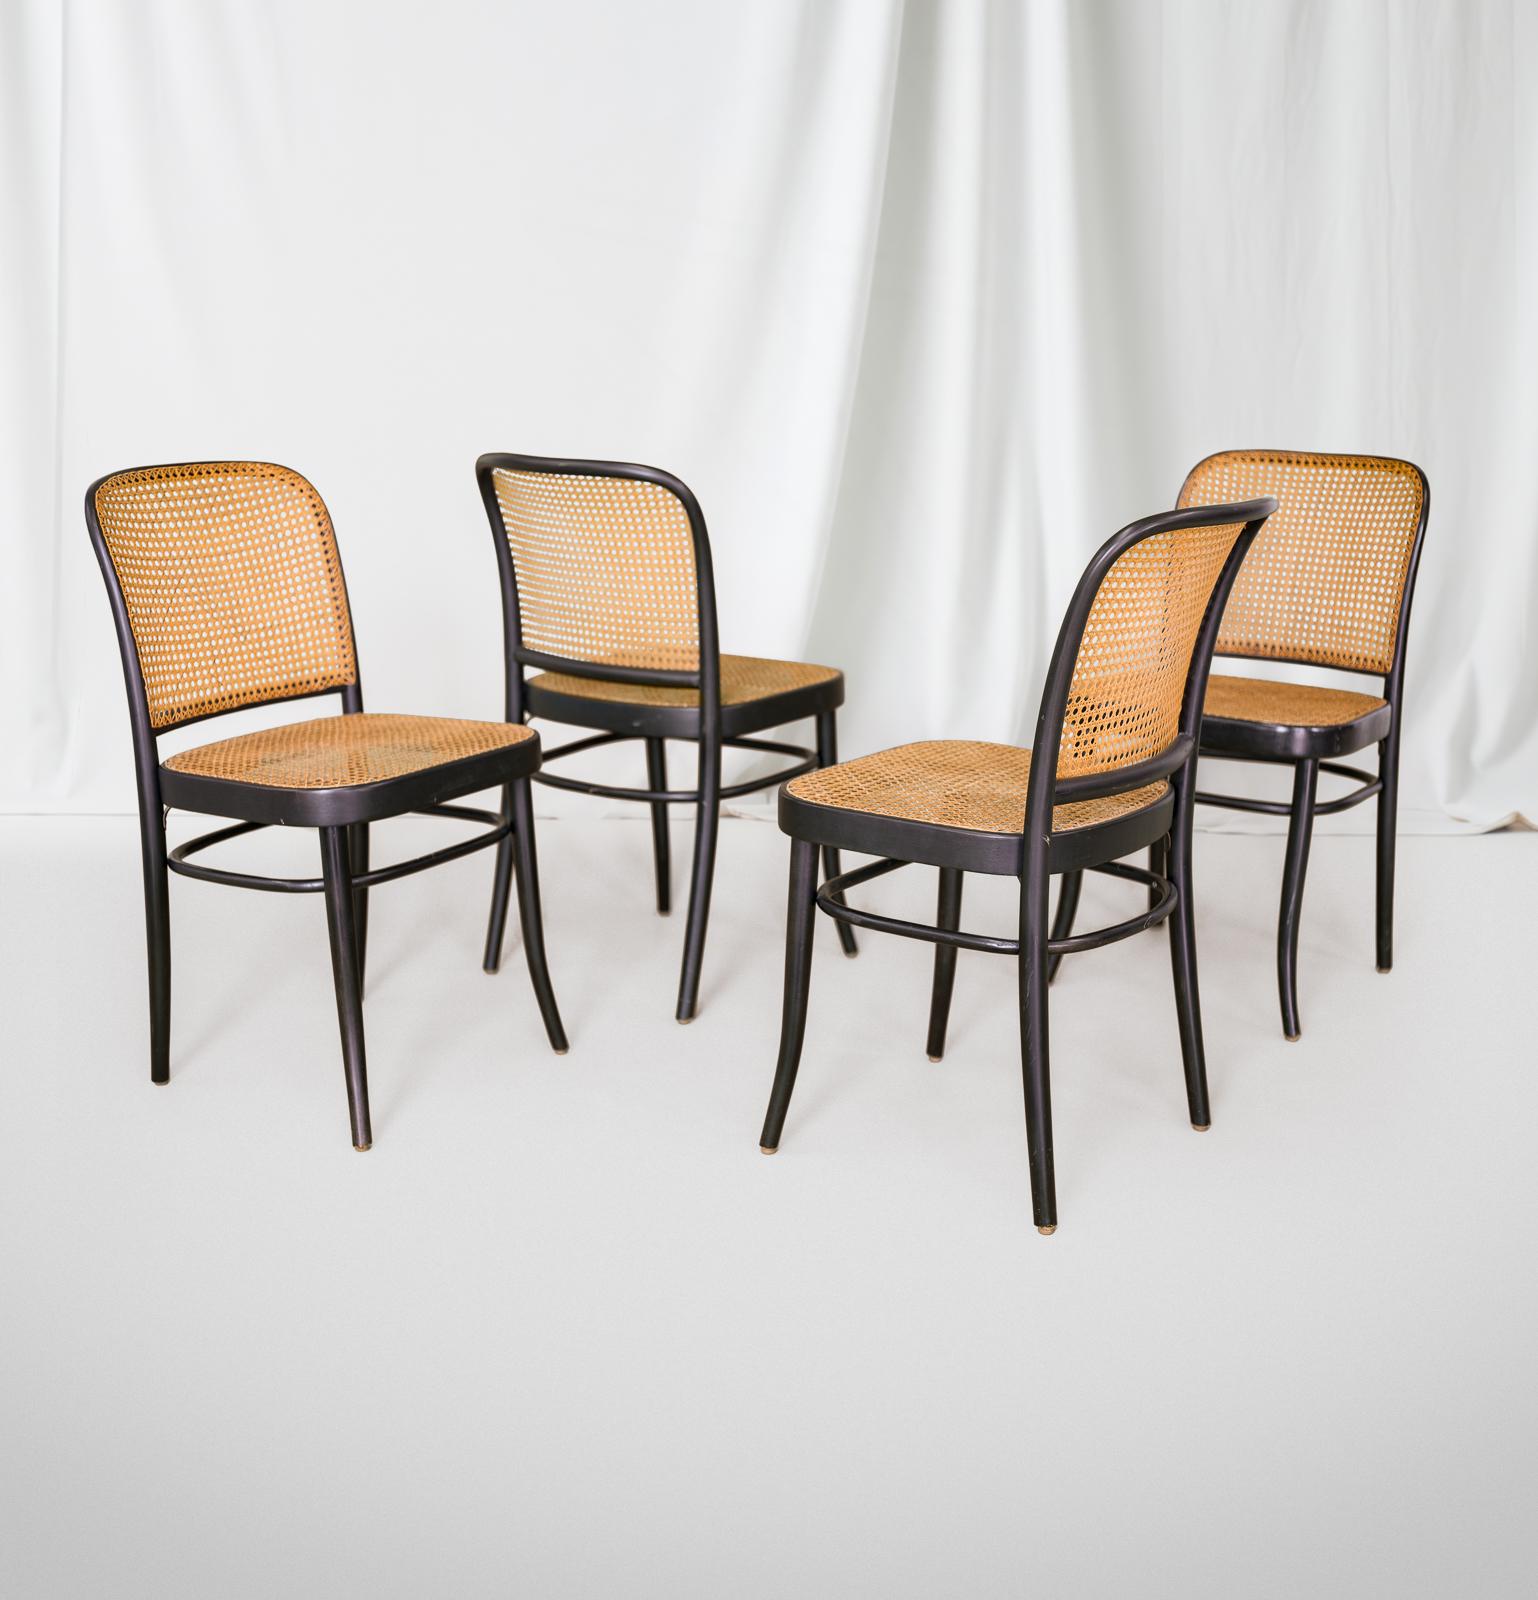 Josef Hoffman black 811 Prague chair. Made in Czechoslovakia and imported by Stendig. Chairs have original caning and paint. Bentwood and caned seat and back. Chairs are in great vintage condition with some light scratches and scuffs from age and